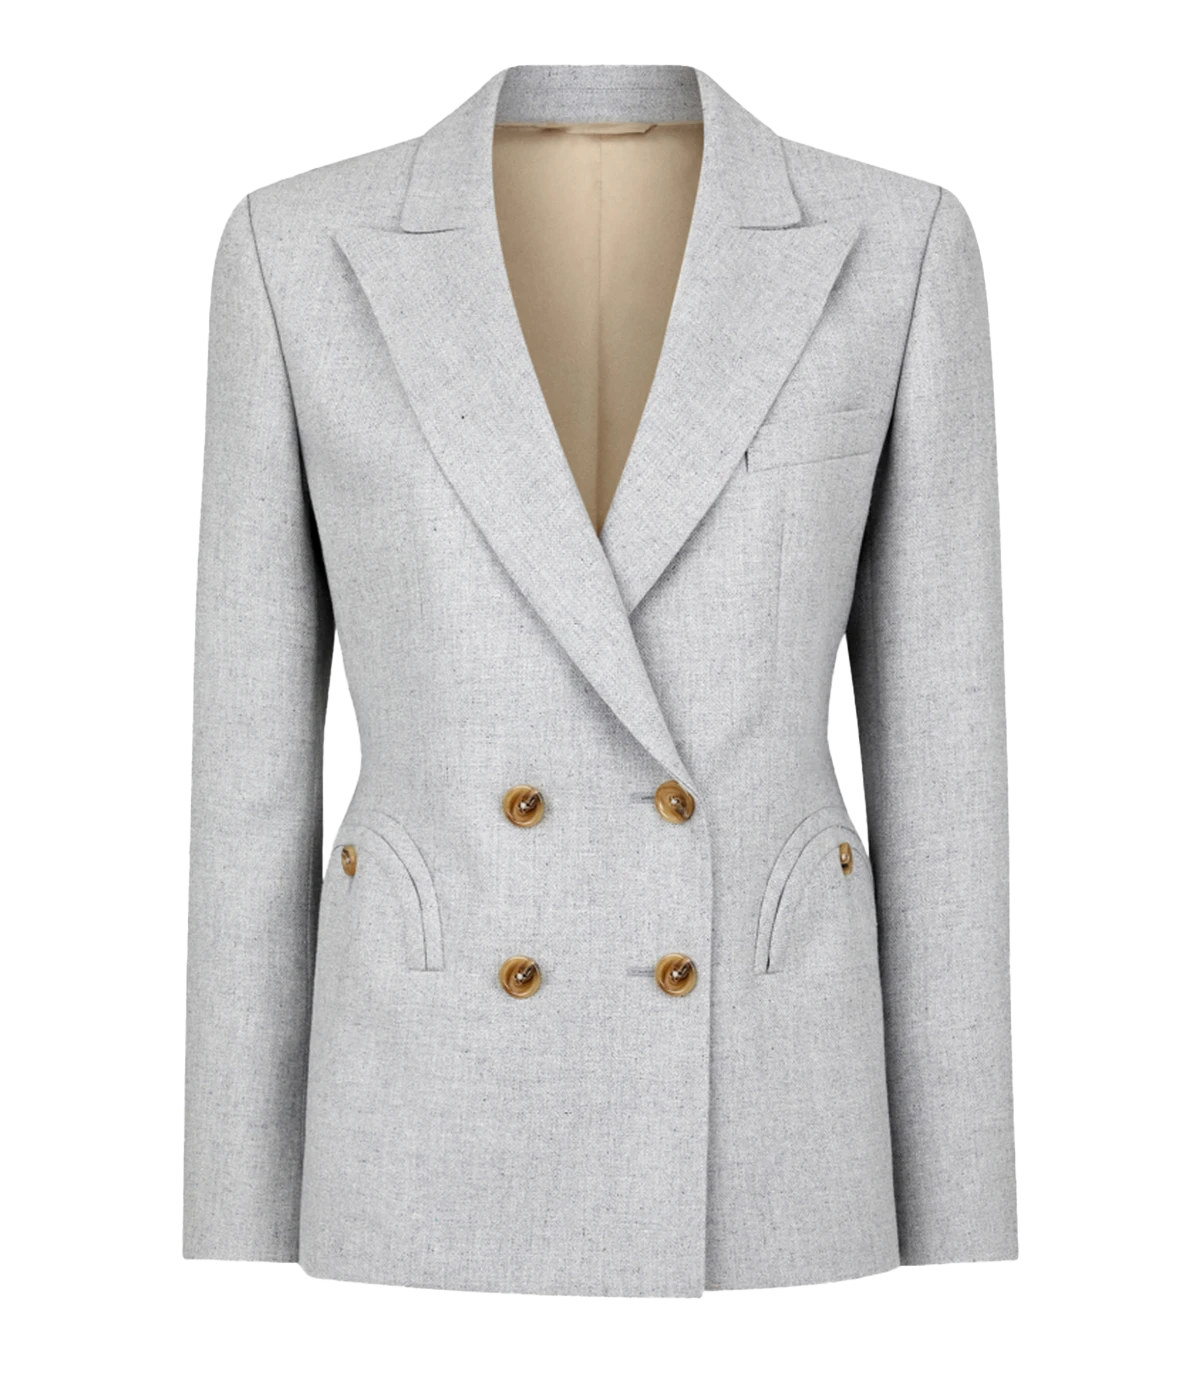 Double breasted peak lapel jacket by blazé Milano cut from Wool & Silk. Fitted cut, perfect for petite frames